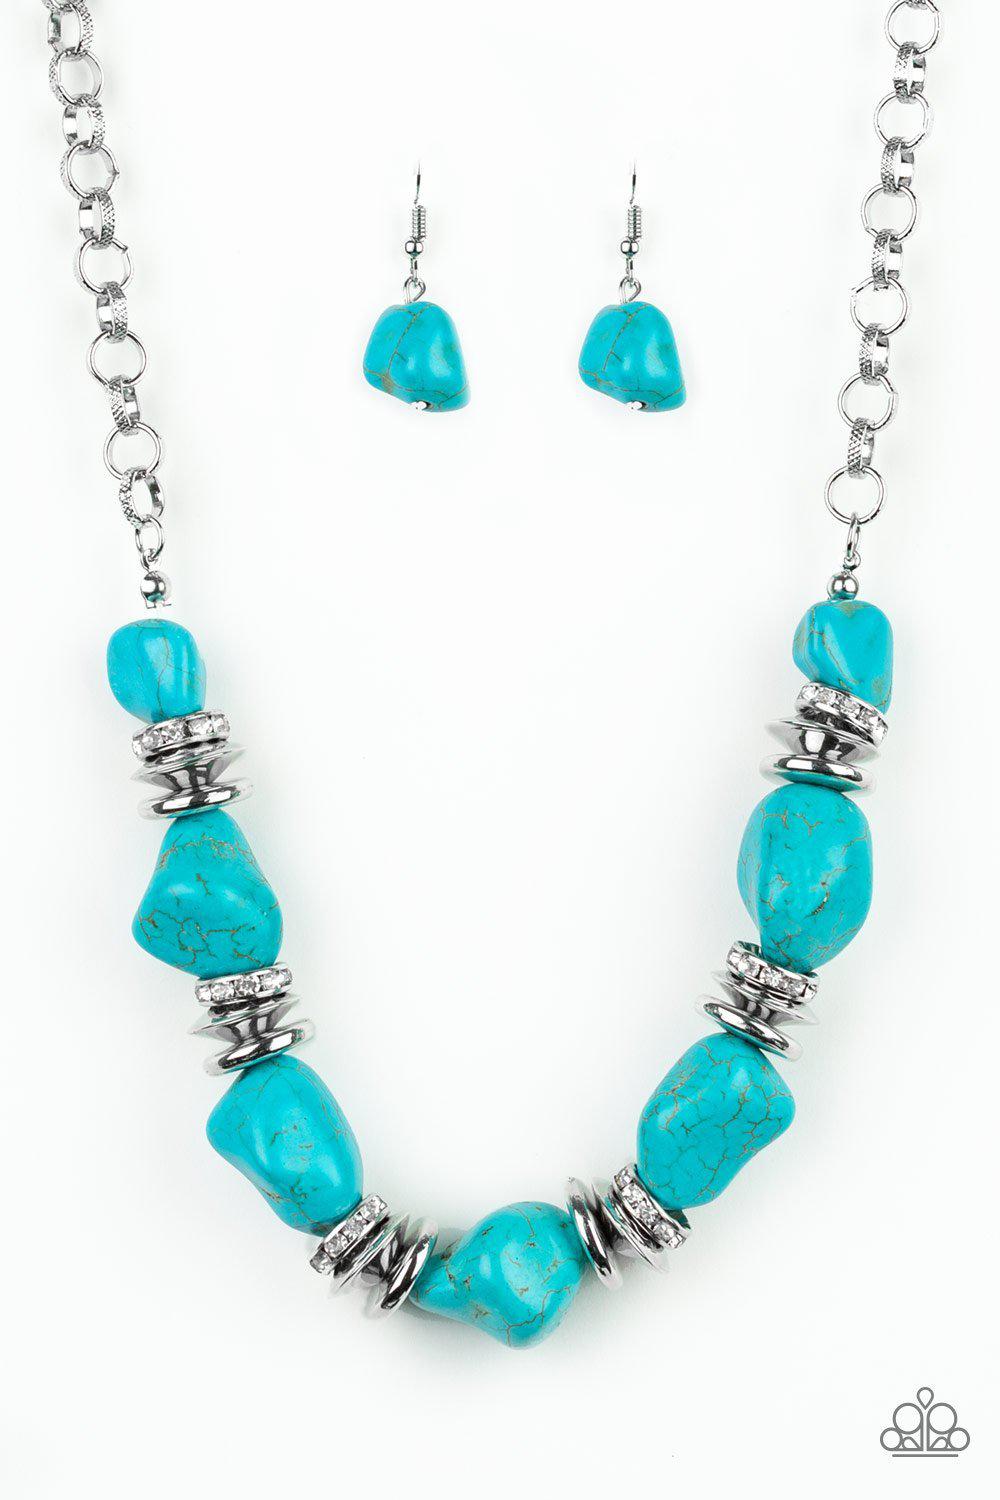 Stunningly Stone Age Silver and Turquoise Blue Stone Necklace - Paparazzi Accessories-CarasShop.com - $5 Jewelry by Cara Jewels